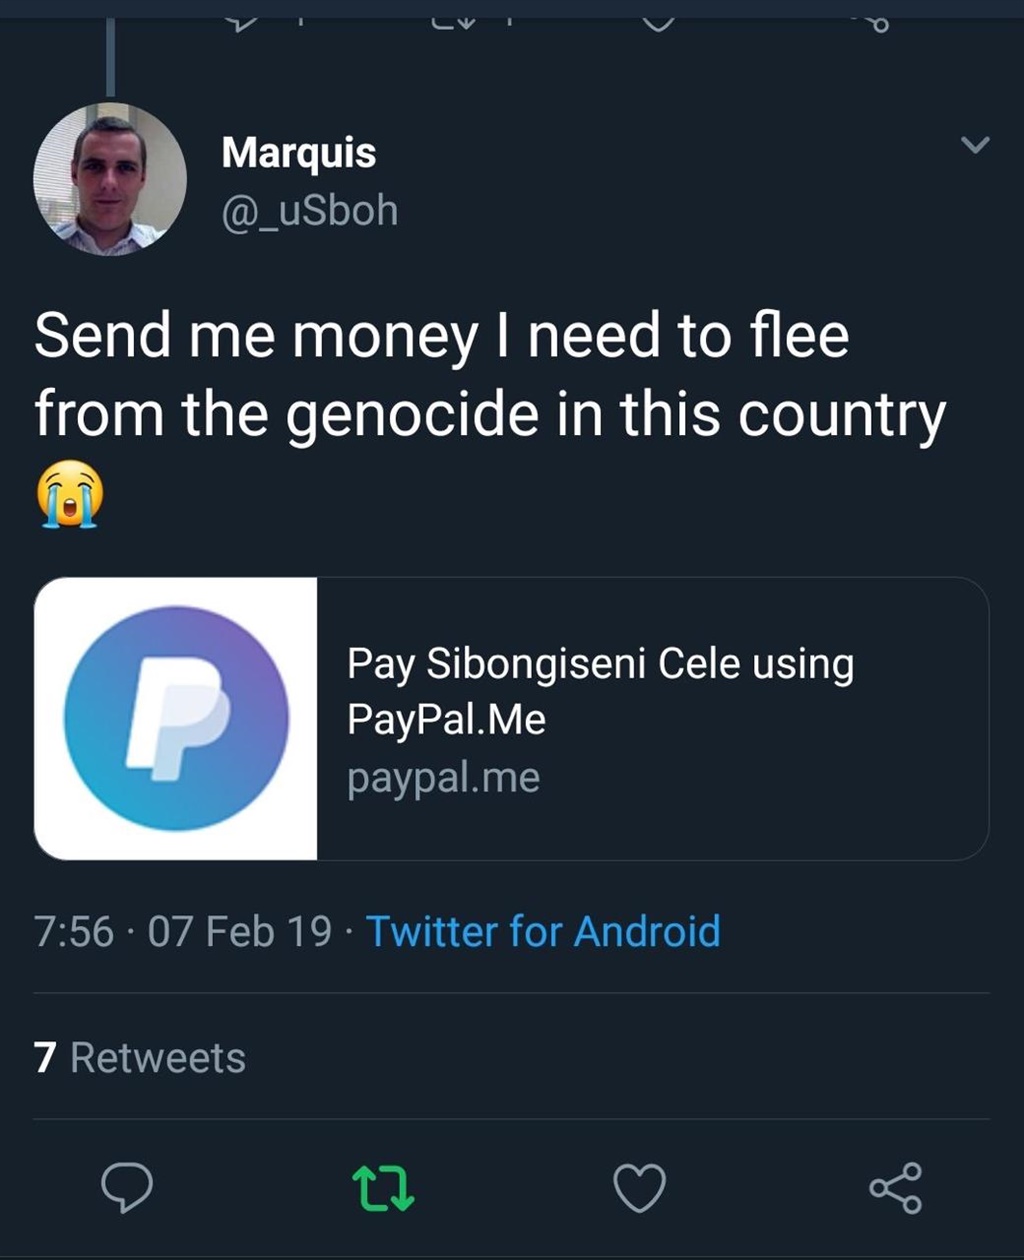 @_uSboh asking for money to flee the country on Tw